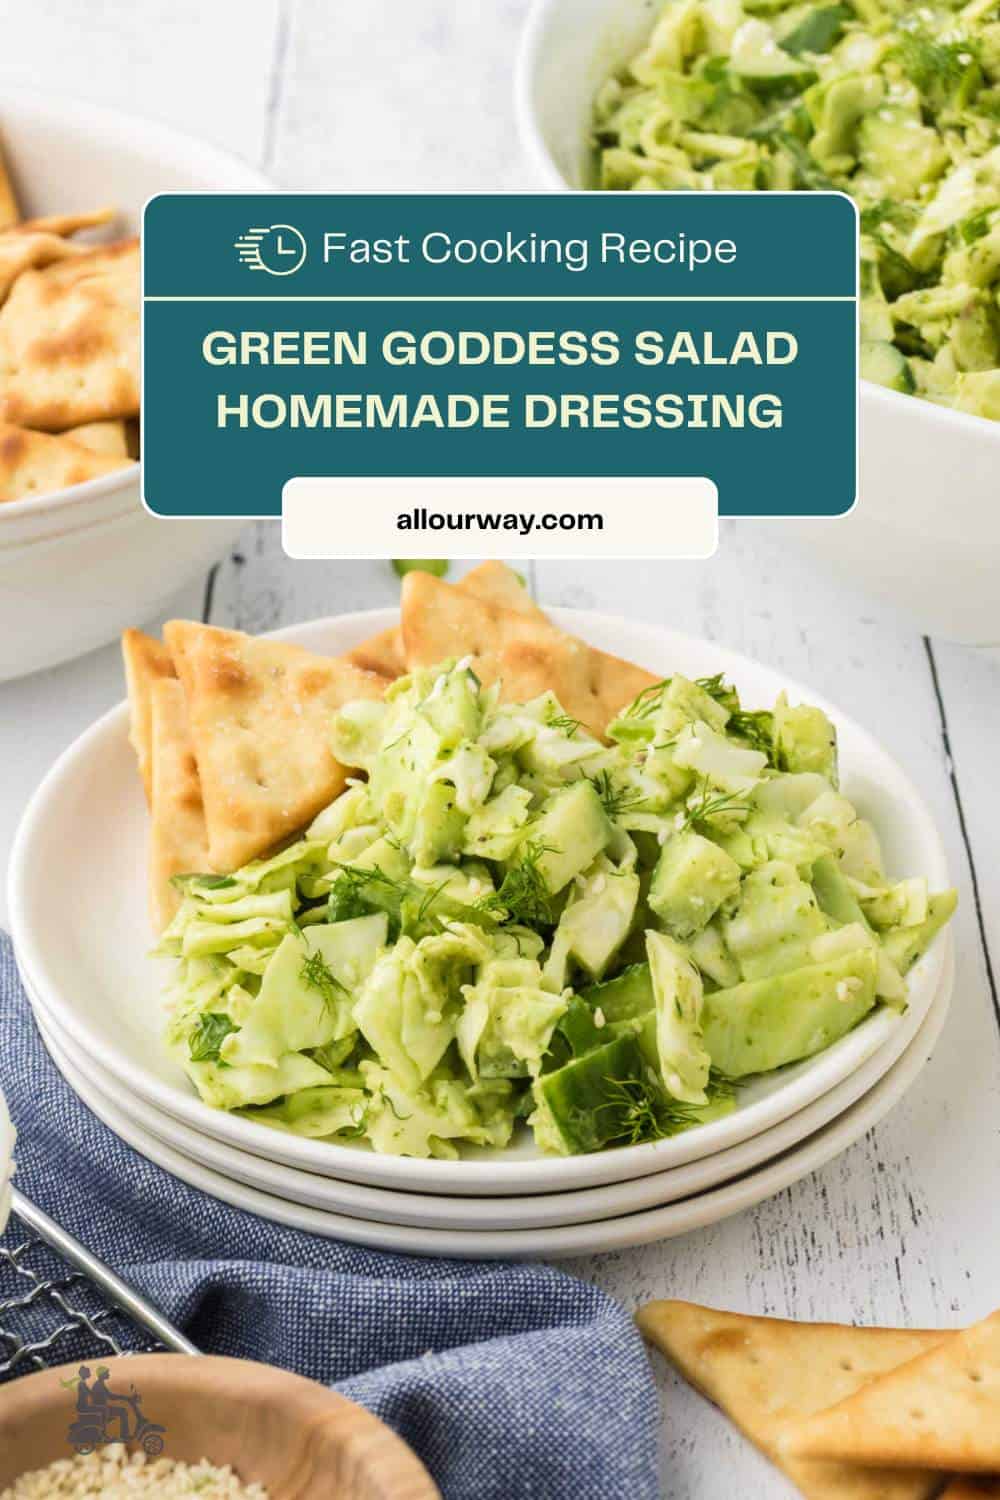 Prepare to be dazzled by the vibrant colors and explosive flavors in the Green Goddess Salad, made with a medley of crisp greens and an absolutely heavenly homemade buttery-tasting dressing that will make your heart skip a beat. This family-favorite salad and dressing will have everyone gobbling their veggies.